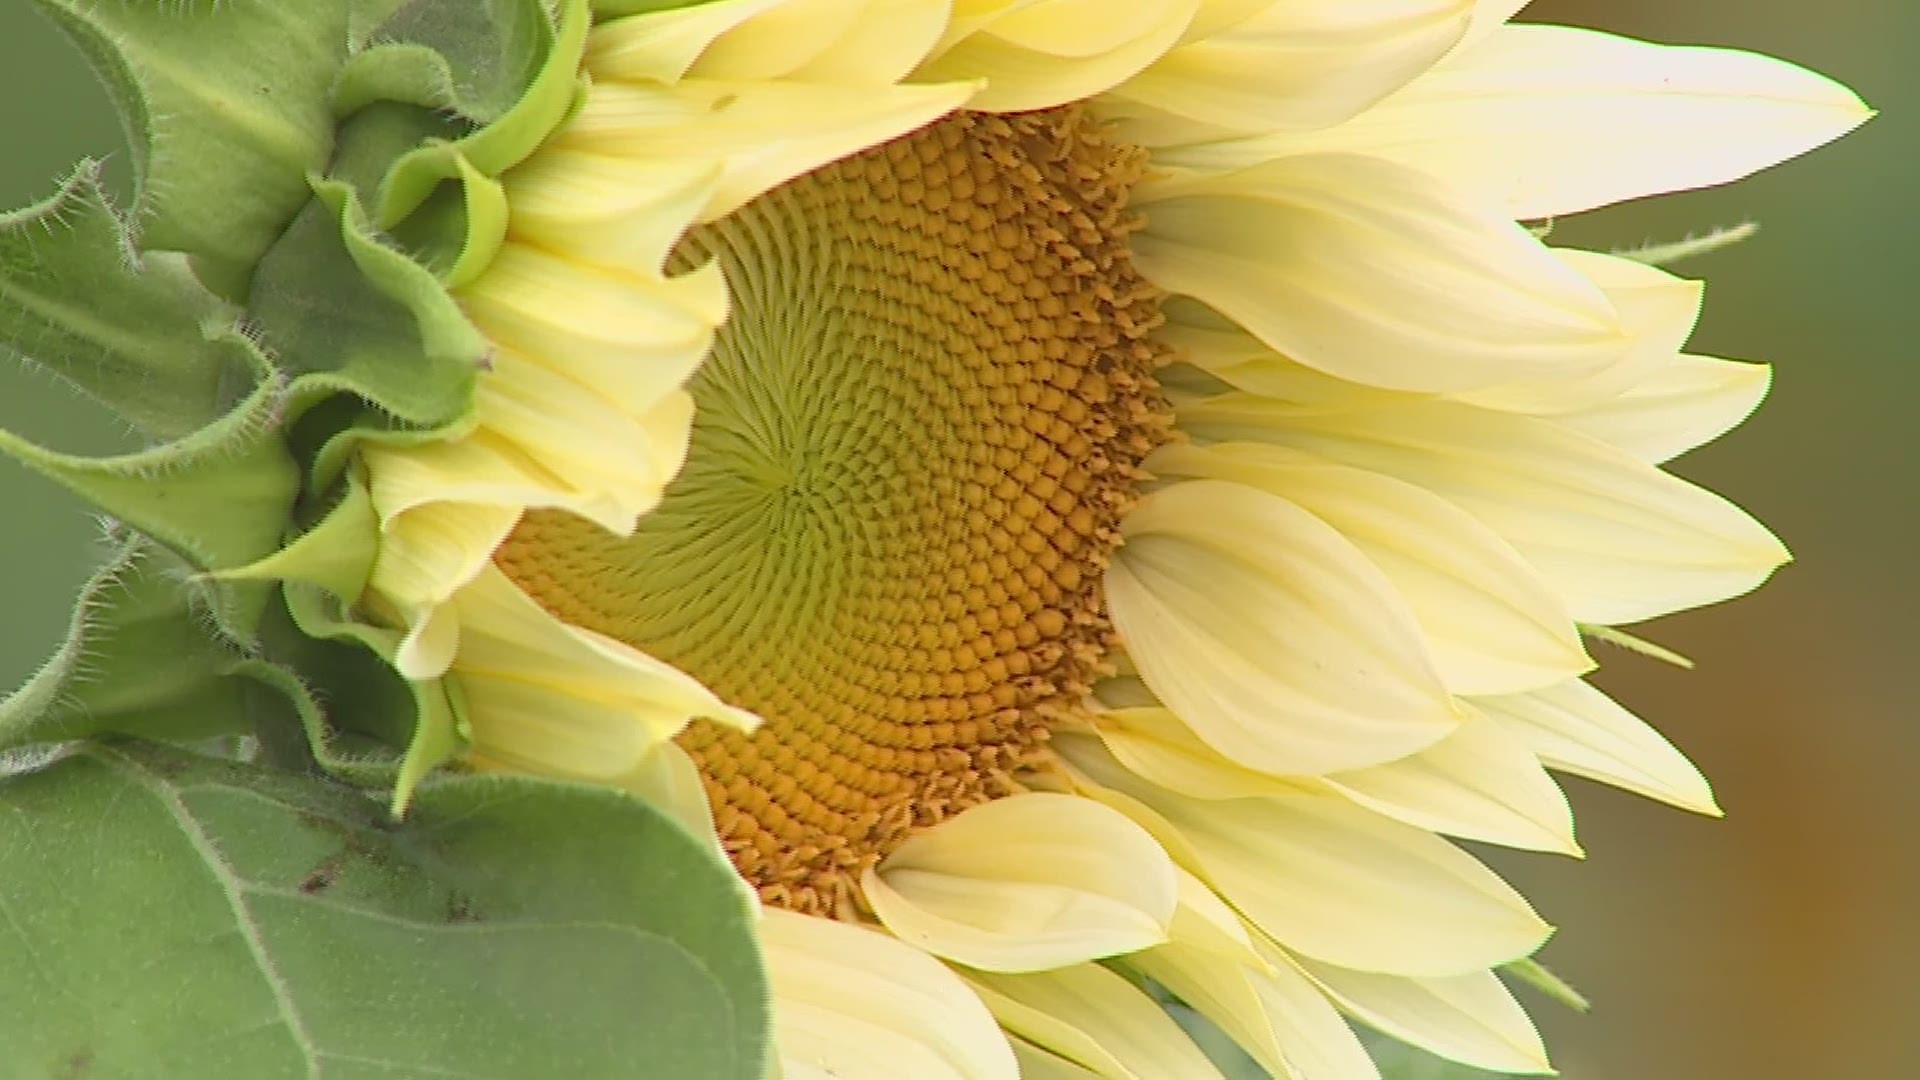 The sunflower patch is open from 10 a.m. to 4 p.m. from July 12th through 25th. Tickets are required.